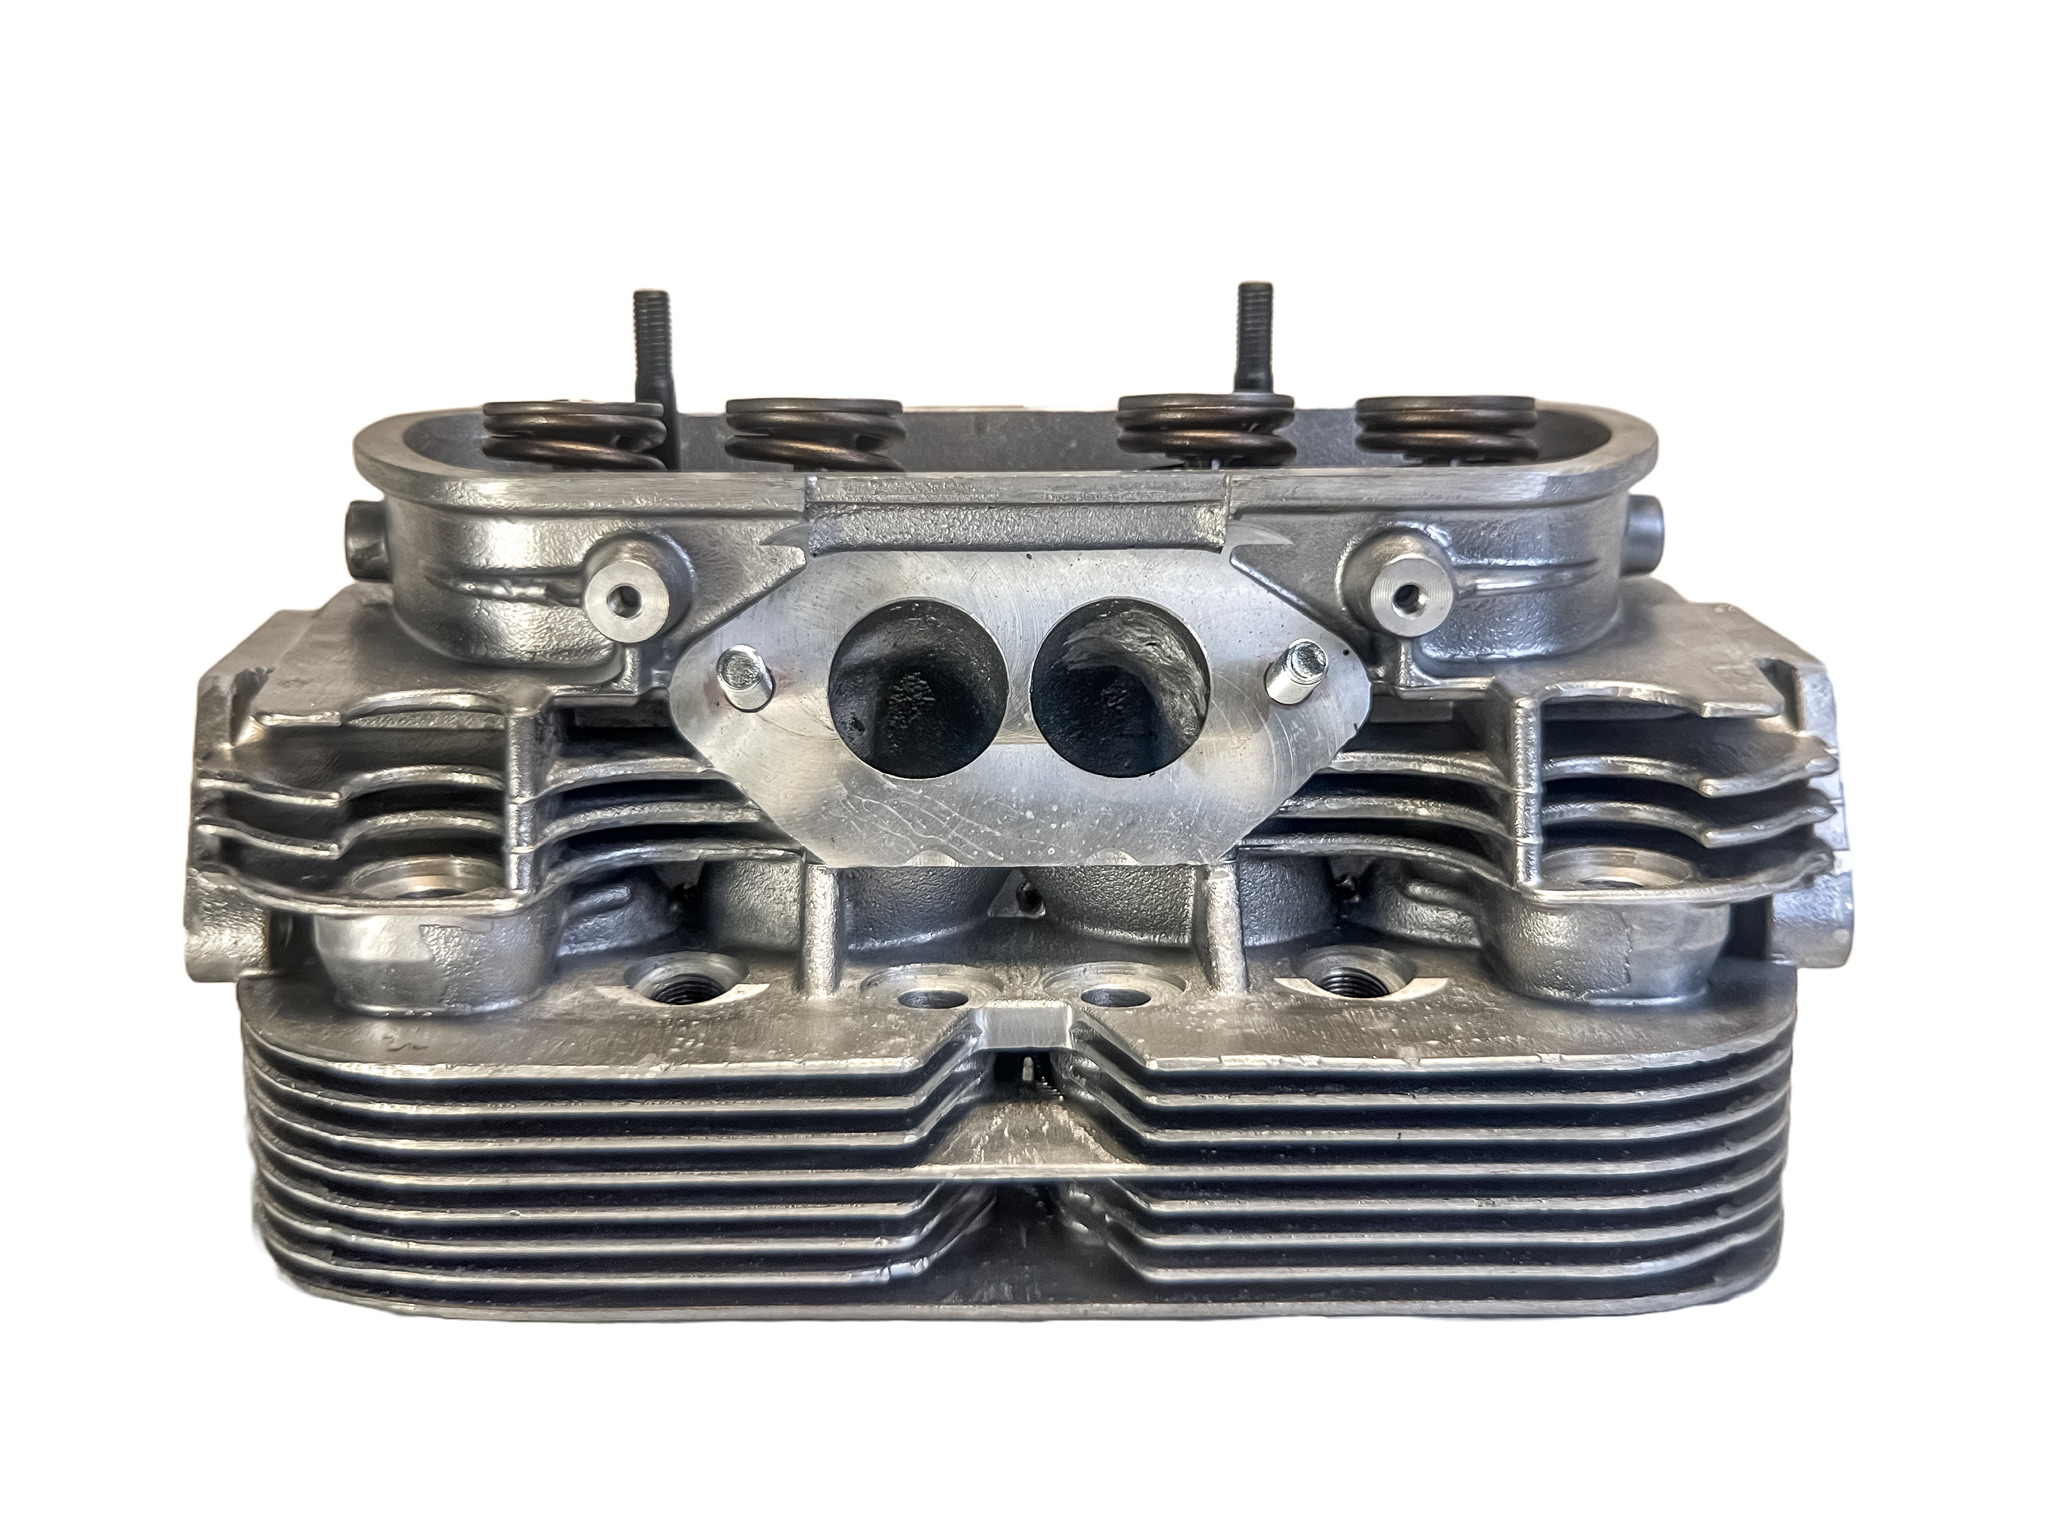 Mofoco 040 Dual Port New Cast Stock Cylinder Head  ***SCORE APPROVED***